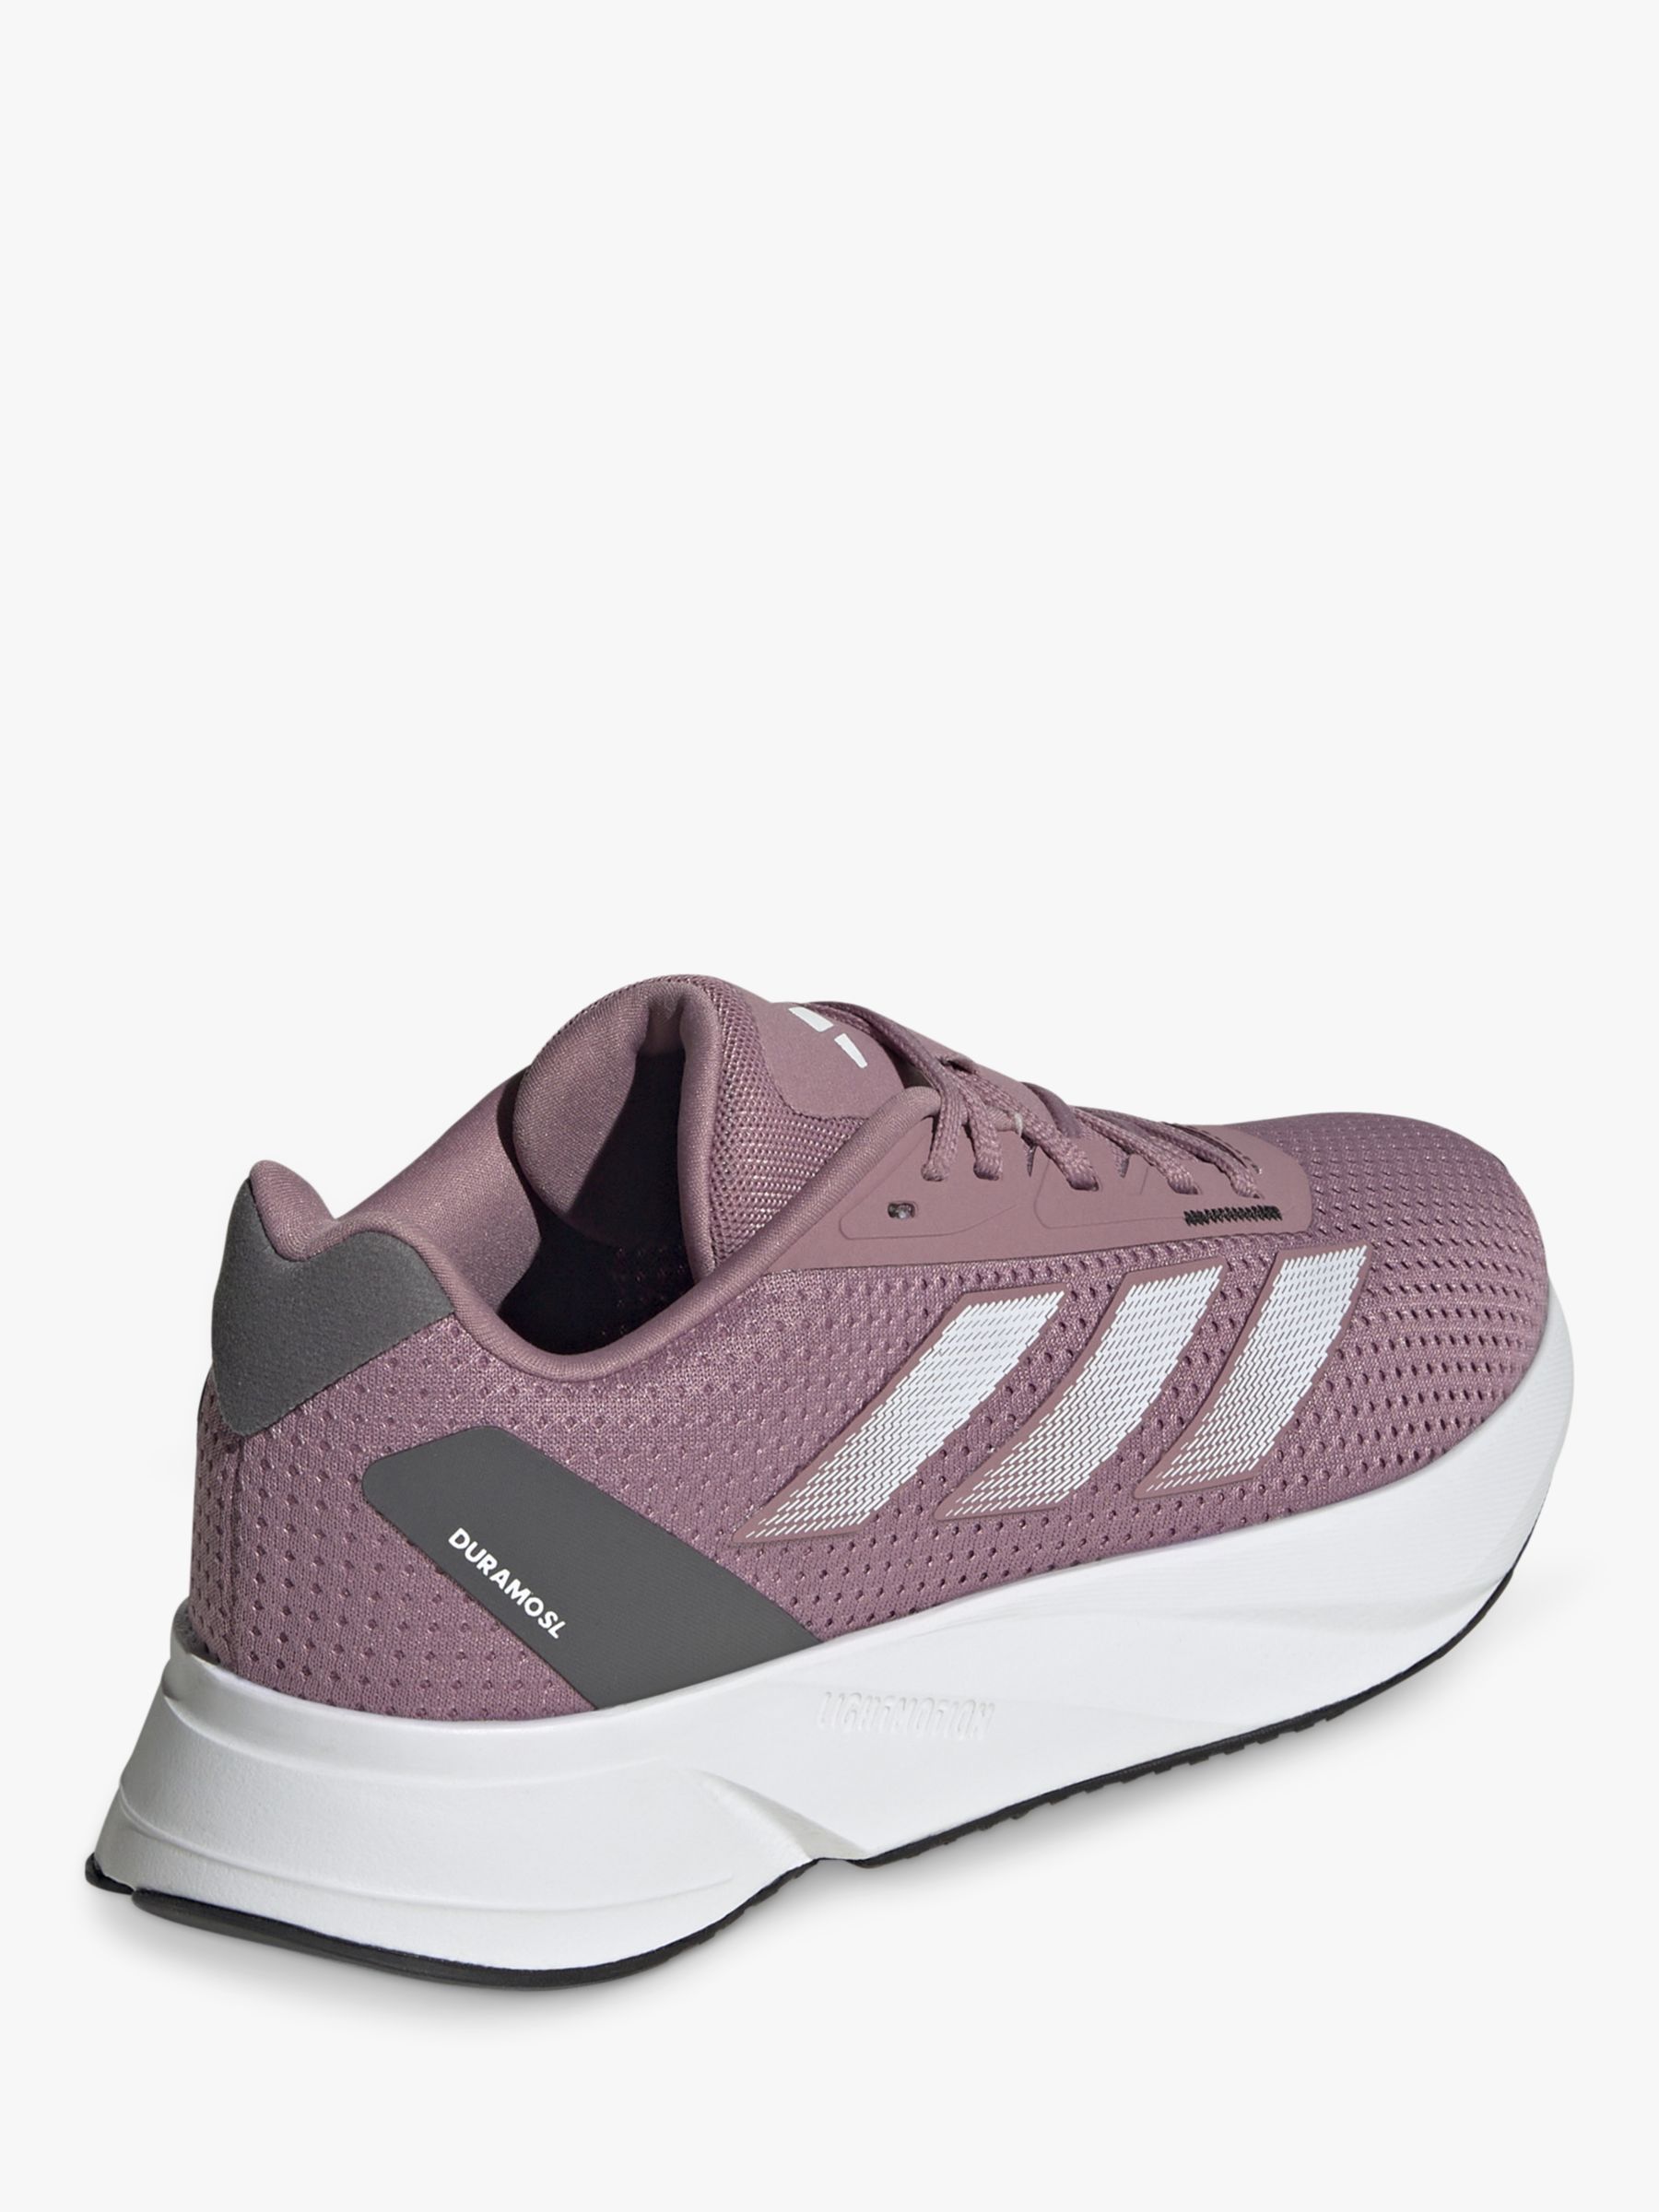 adidas Duramo SL Trainers, Orchid/White/Black at John Lewis & Partners